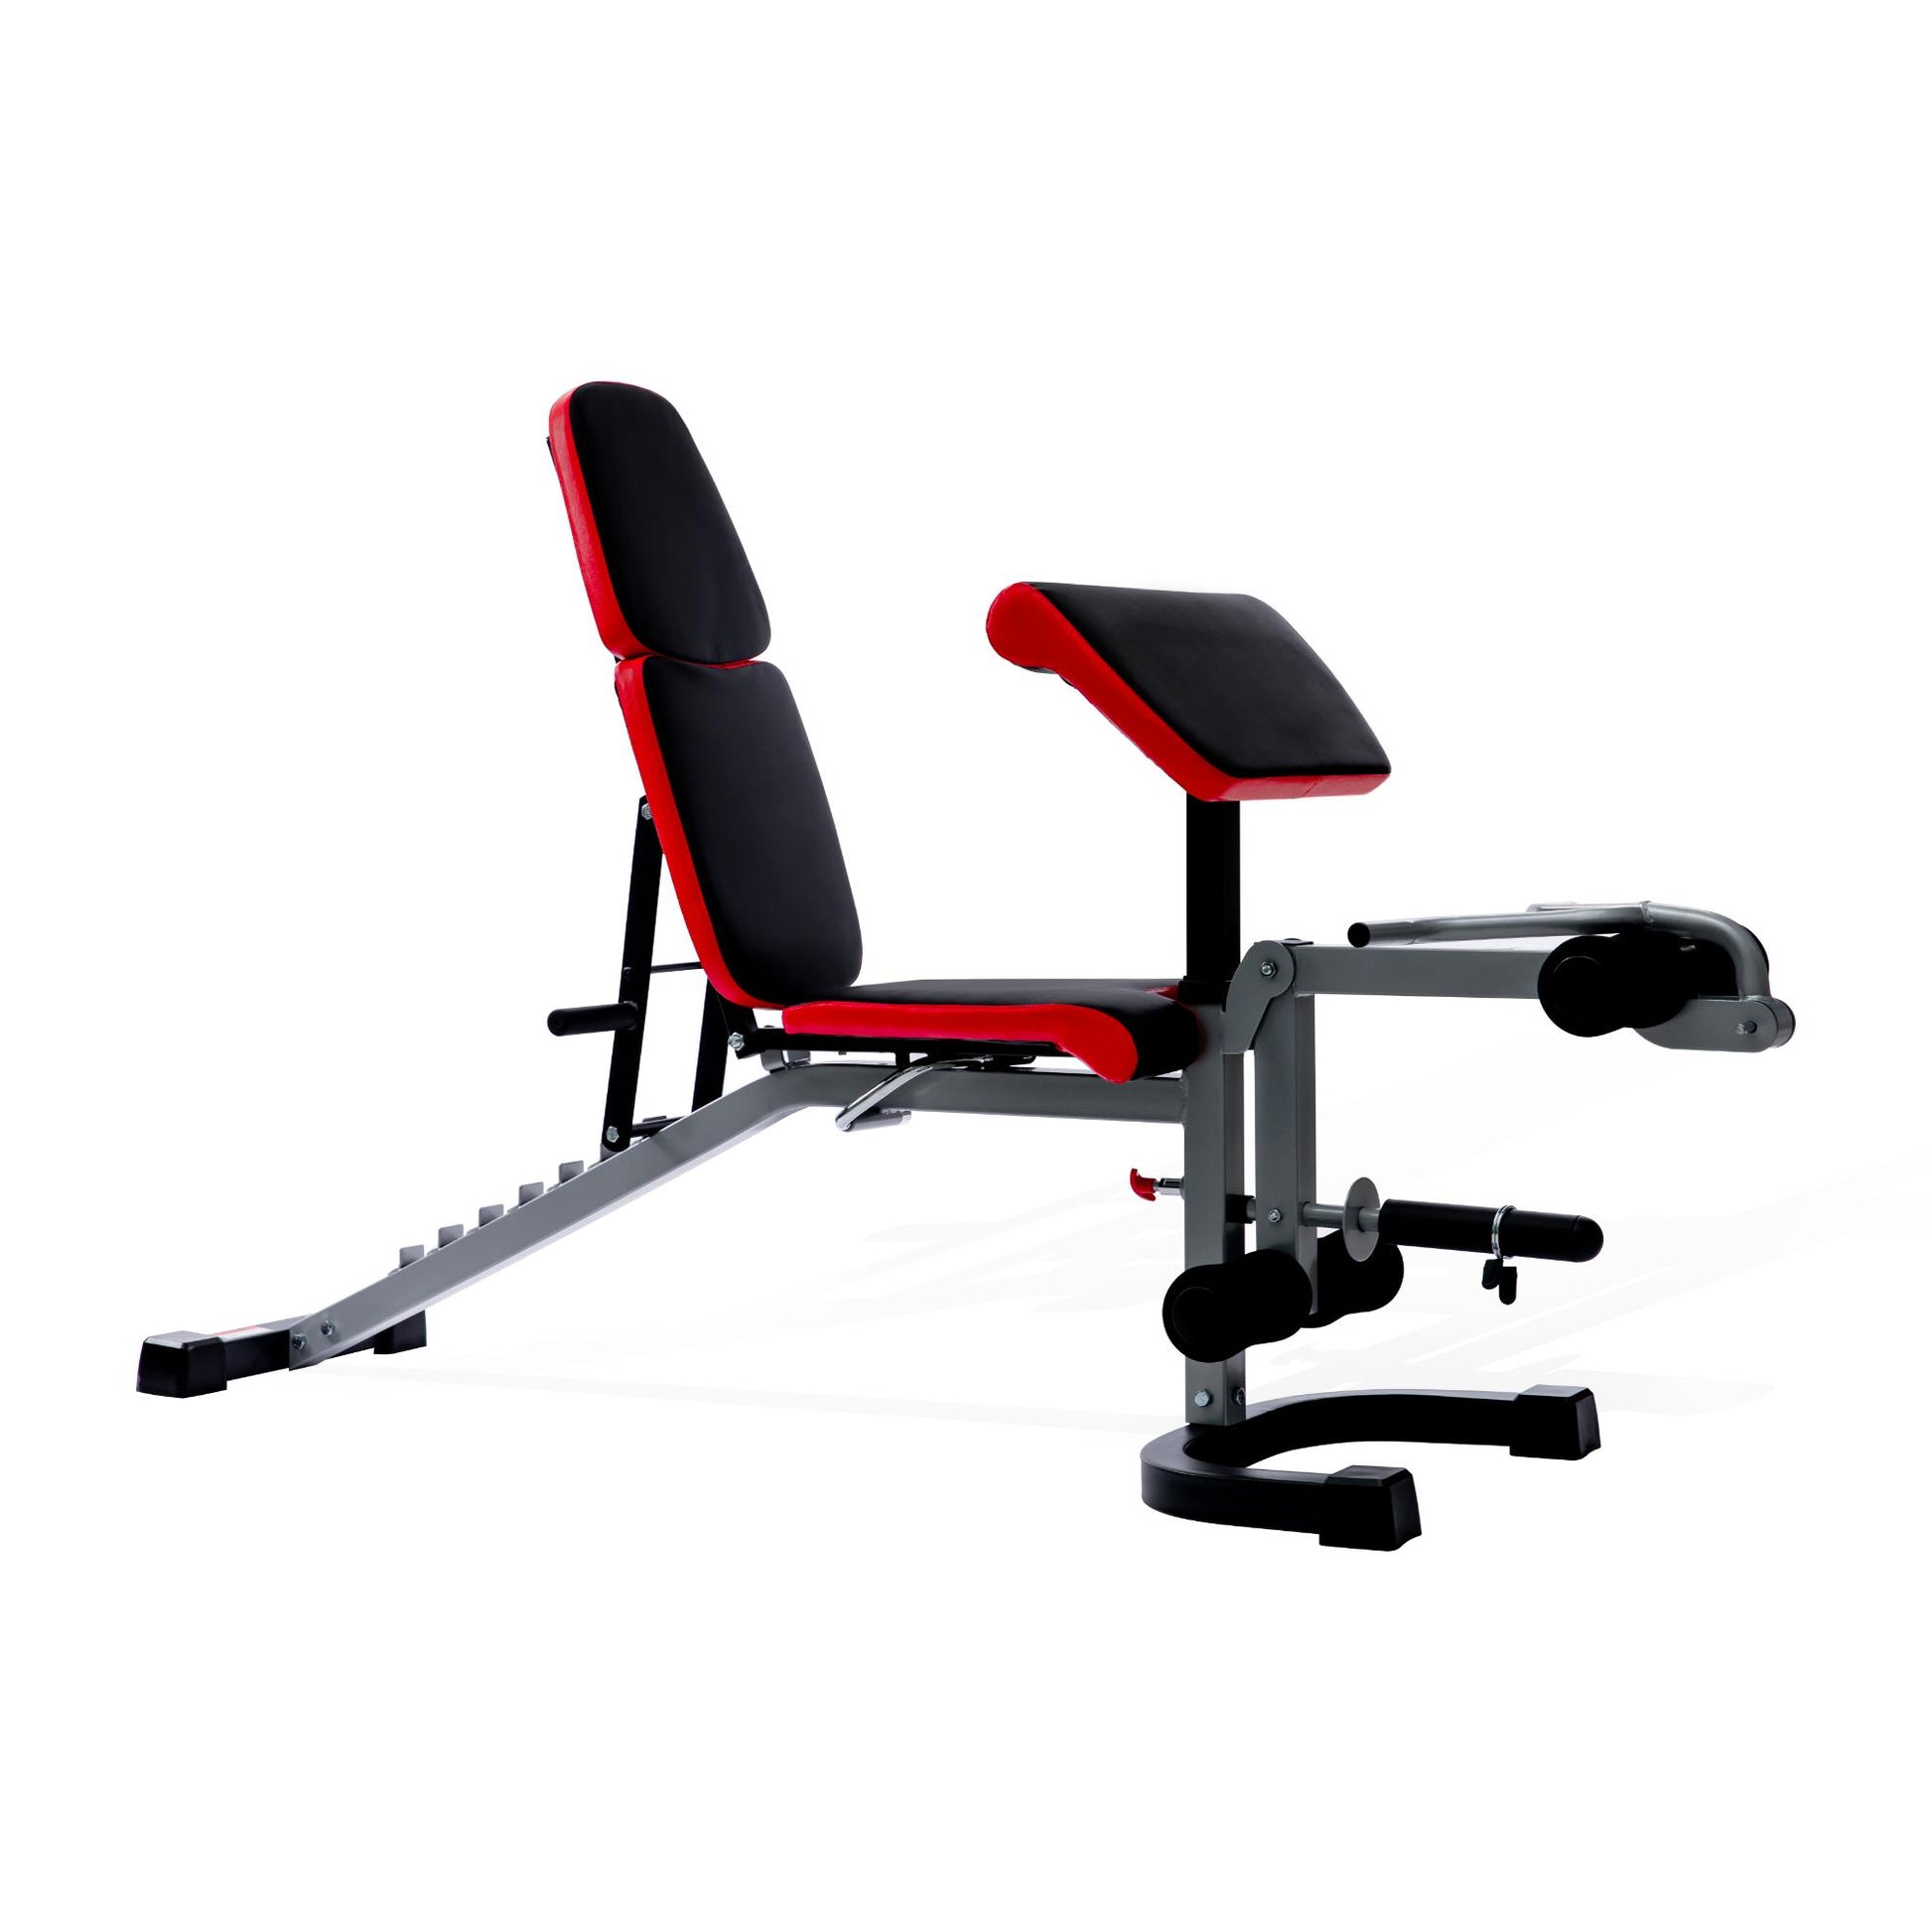 |Viavito TG500 Multi Function Utility Weight Bench - angle updated|